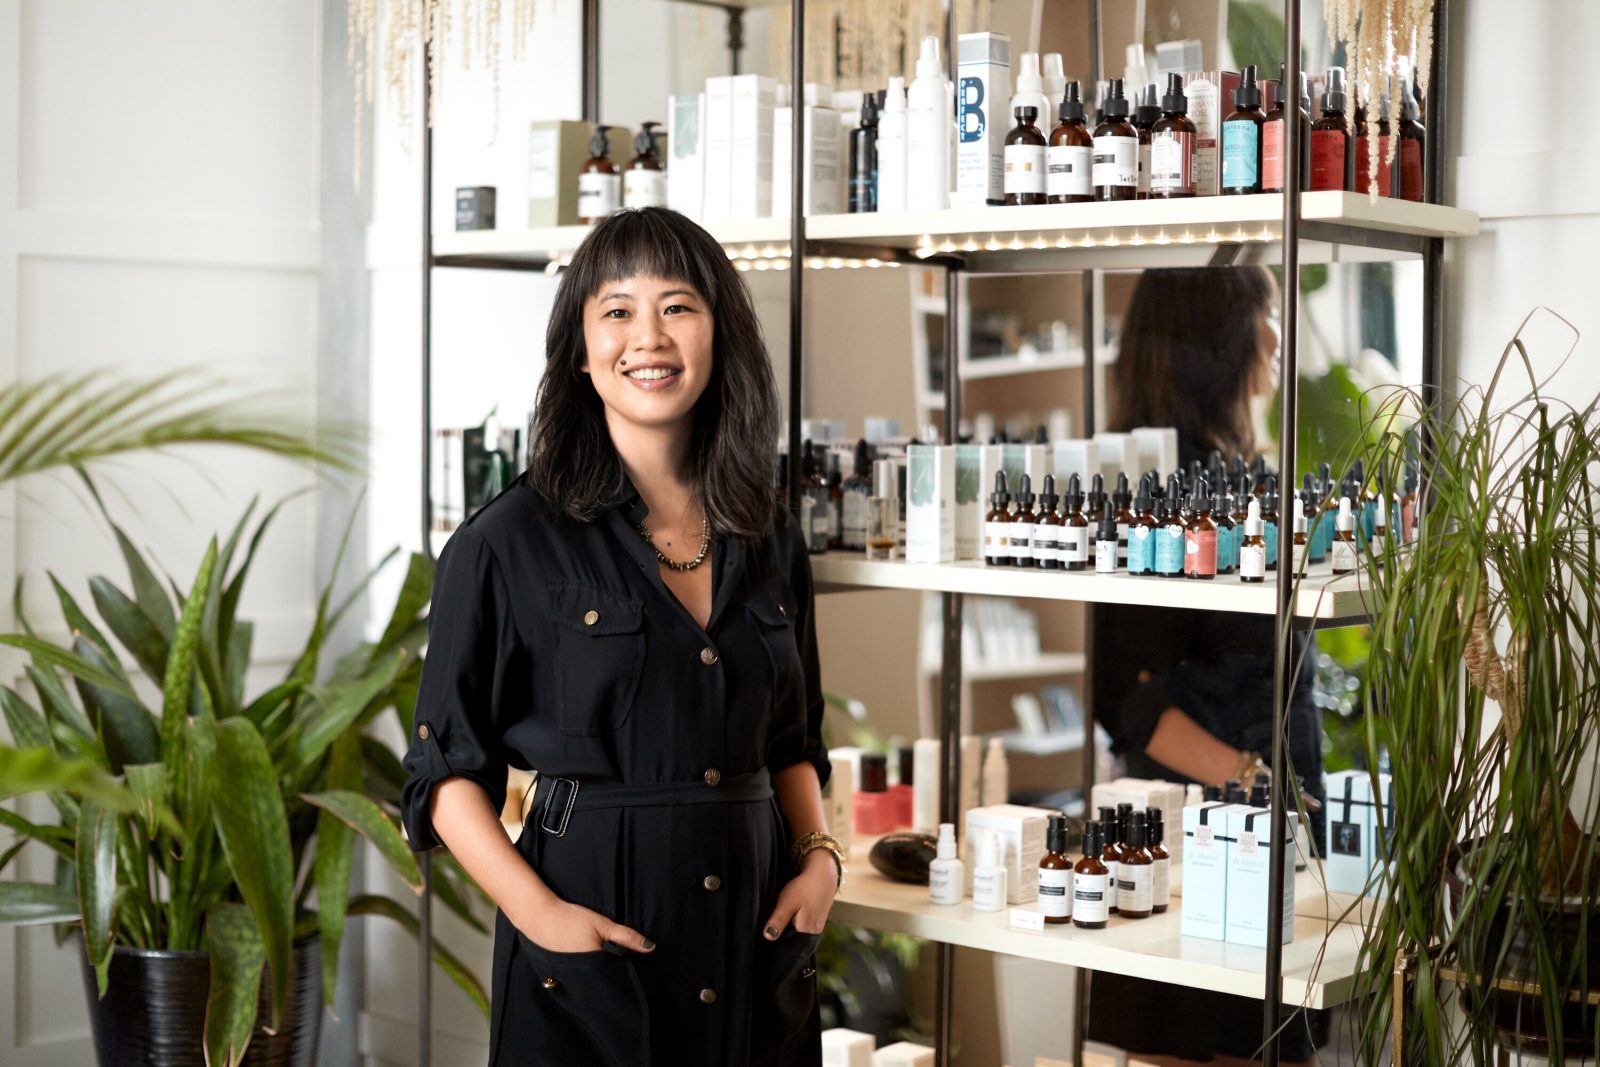 Sandra Lanshin Chiu, L.Ac. is a licensed acupuncturist, herbalist, and founder of her namesake Gua Sha tool, Lanshin-- a.k.a the reigning Gua Sha expert